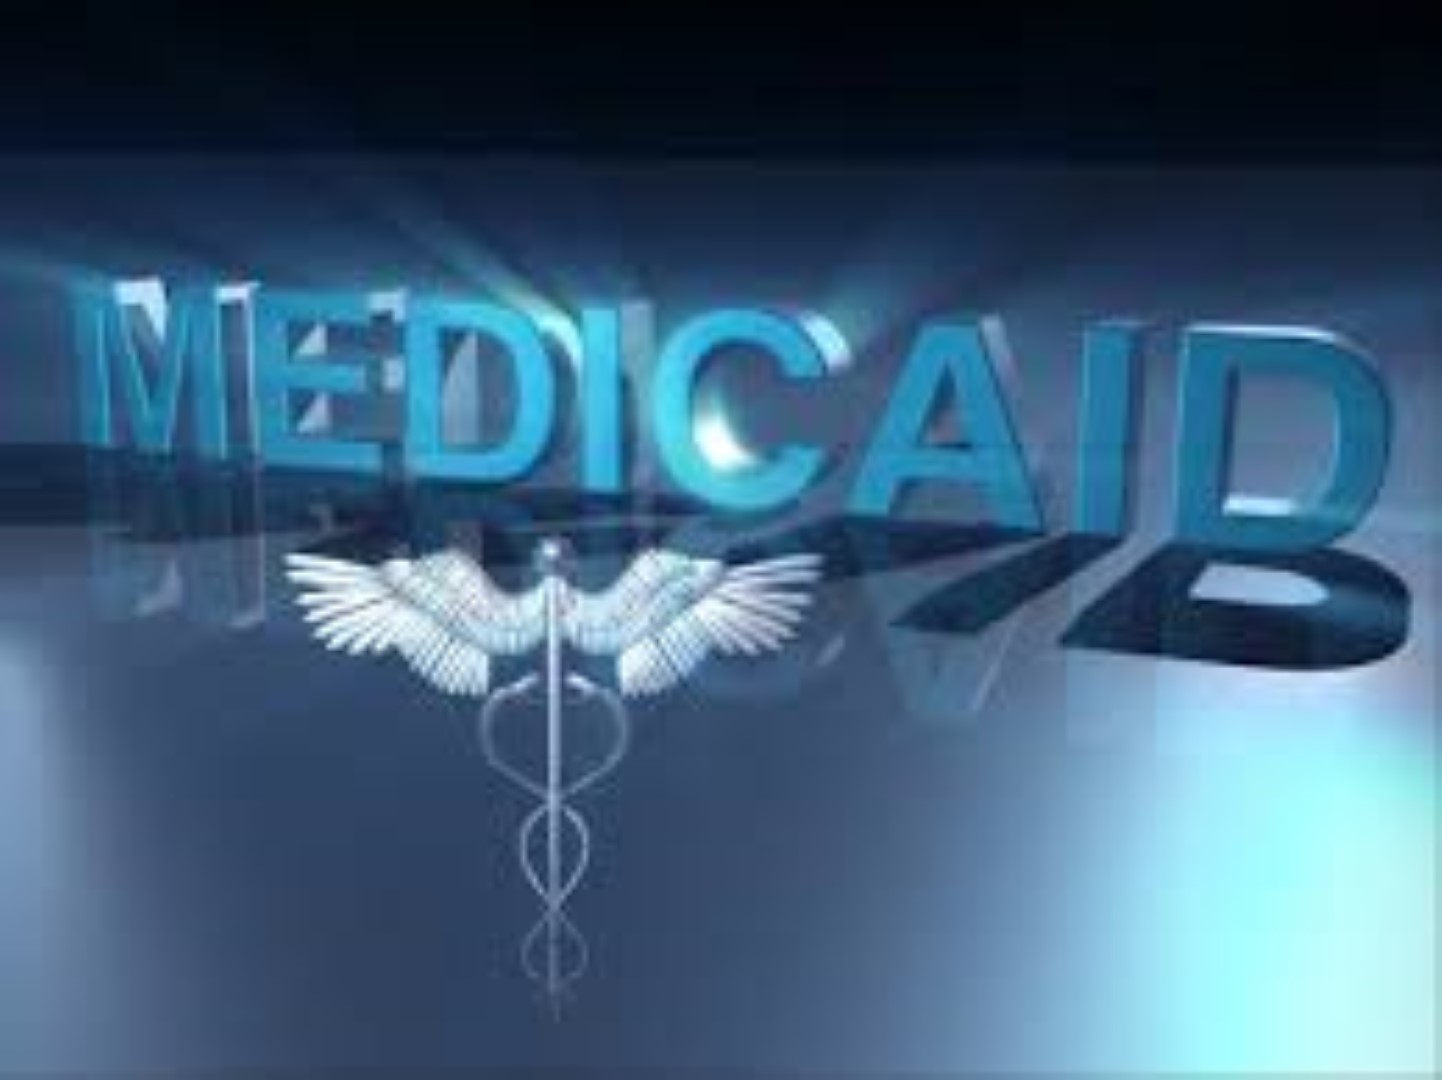 Up to 30,000 state Medicaid clients warned of potential data breach